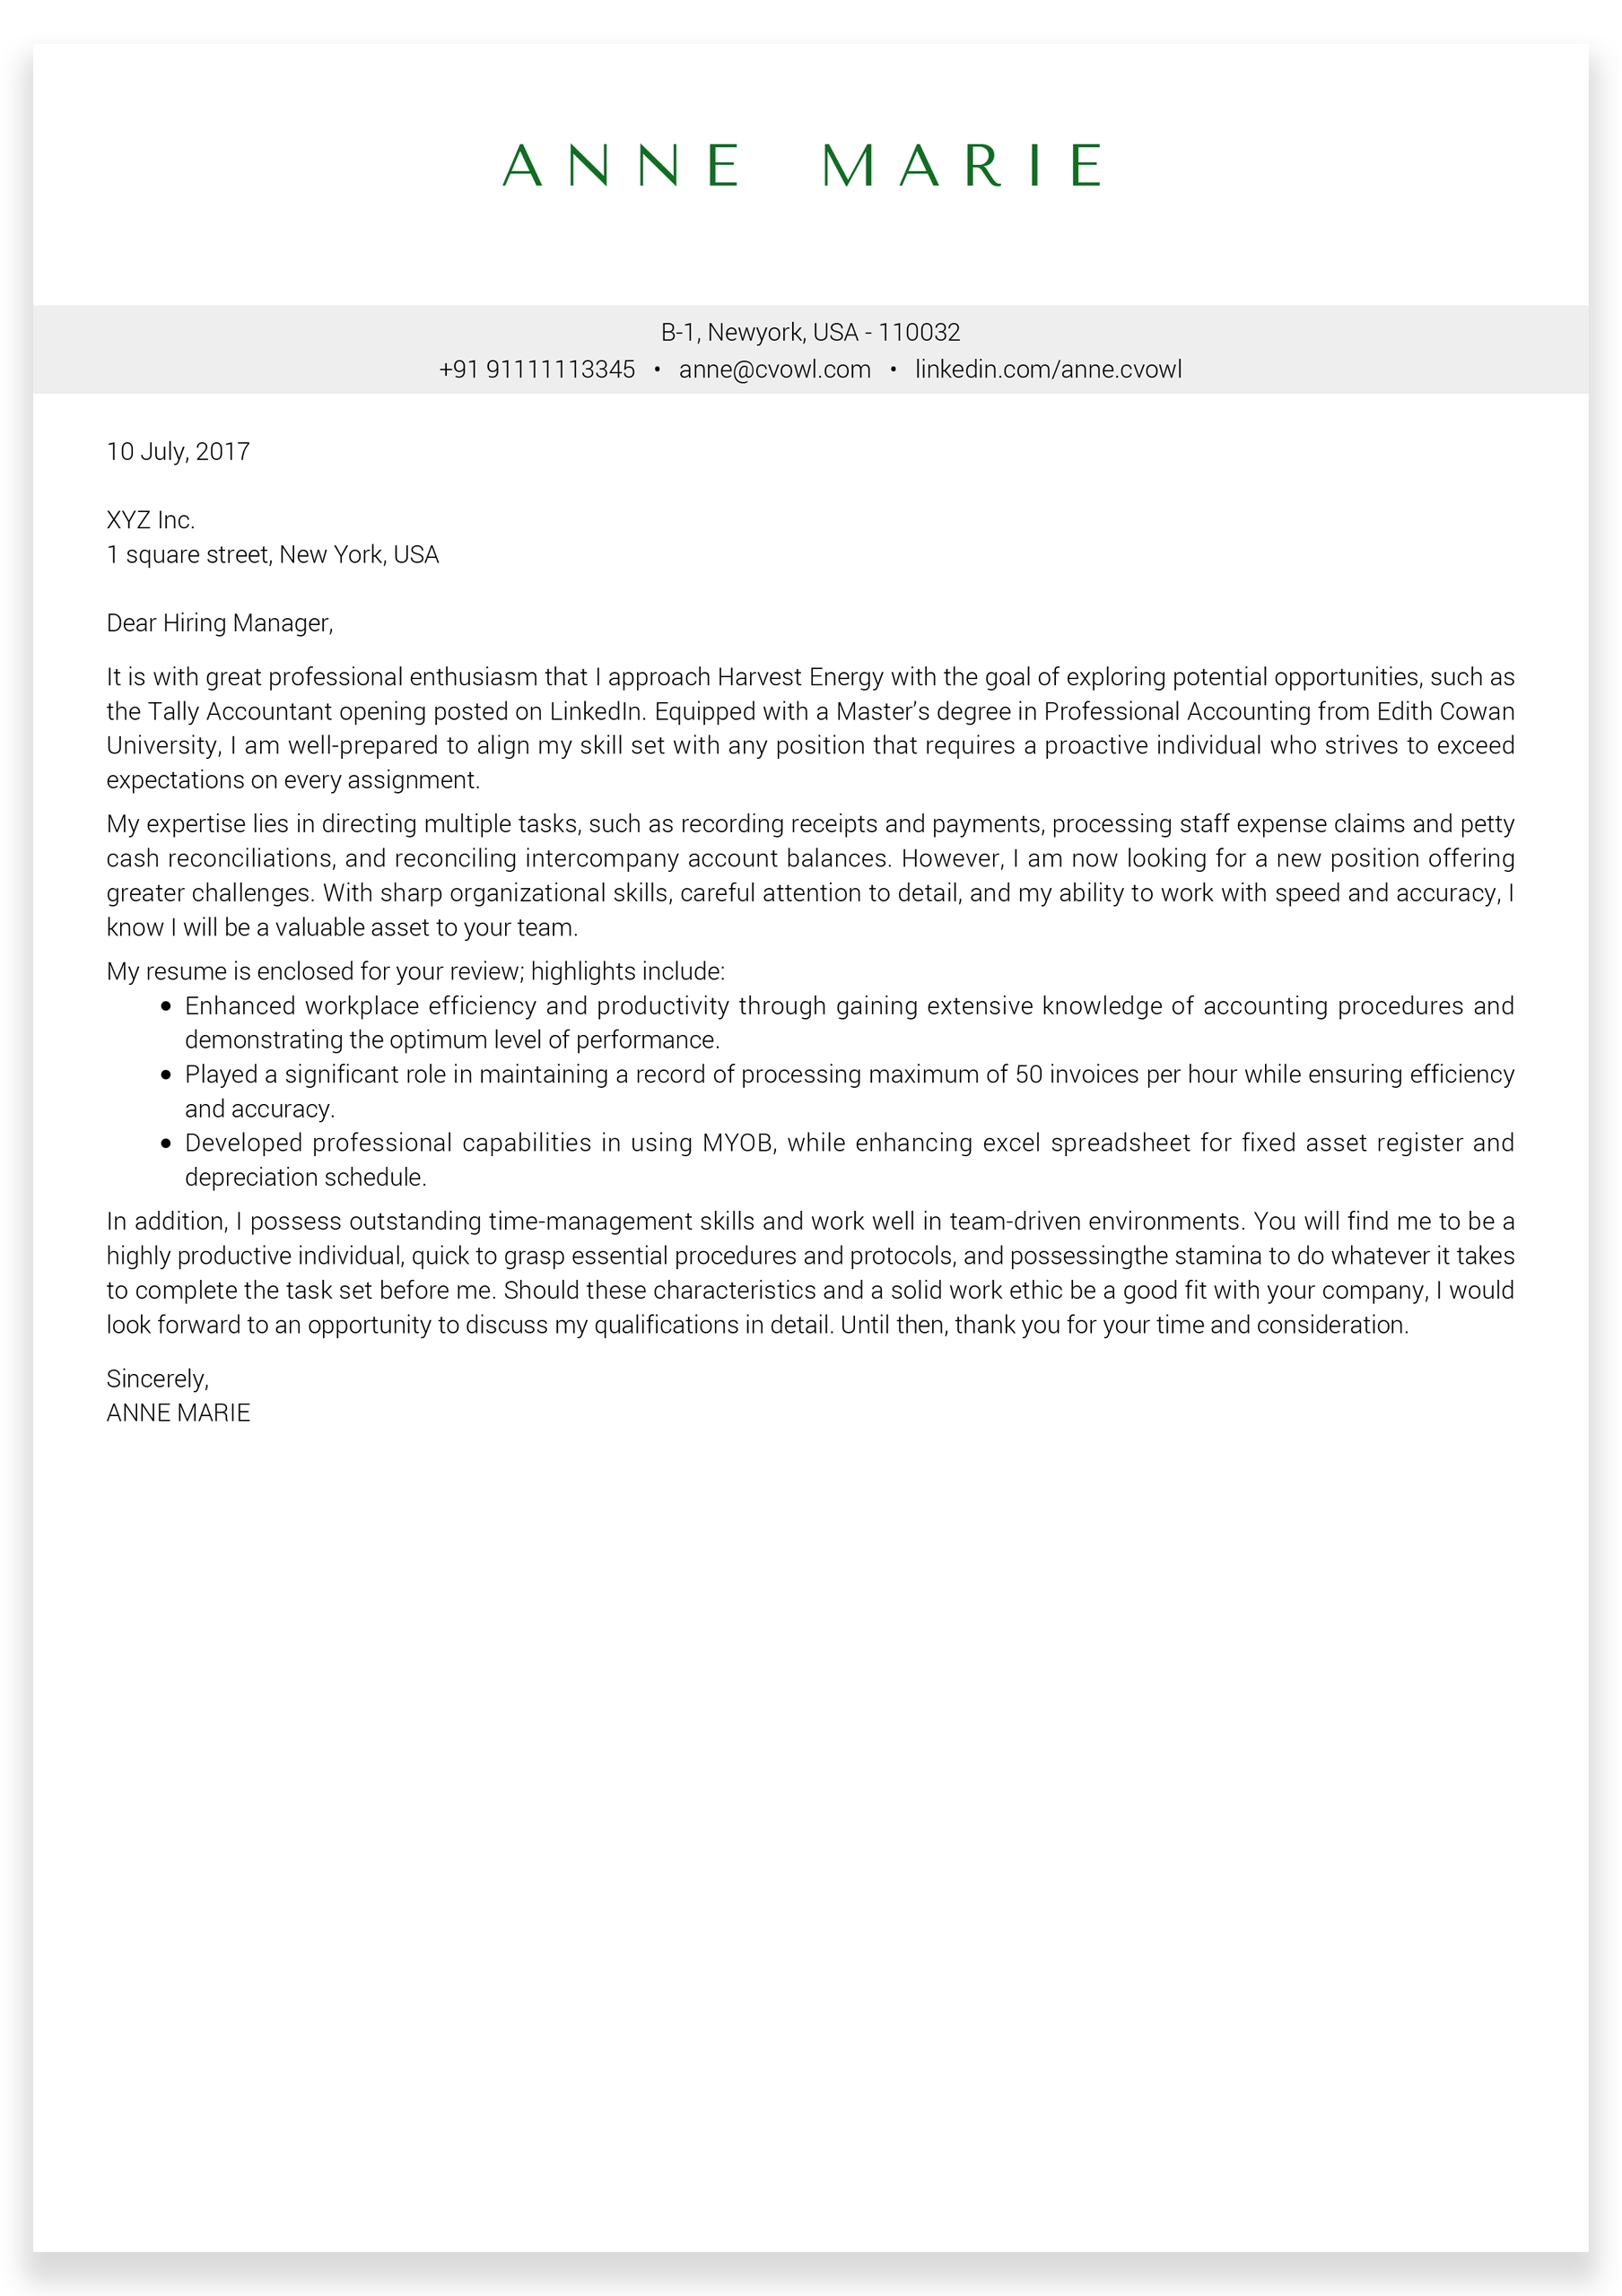 Civil-Structural-Engineer-Cover-Letter-sample5